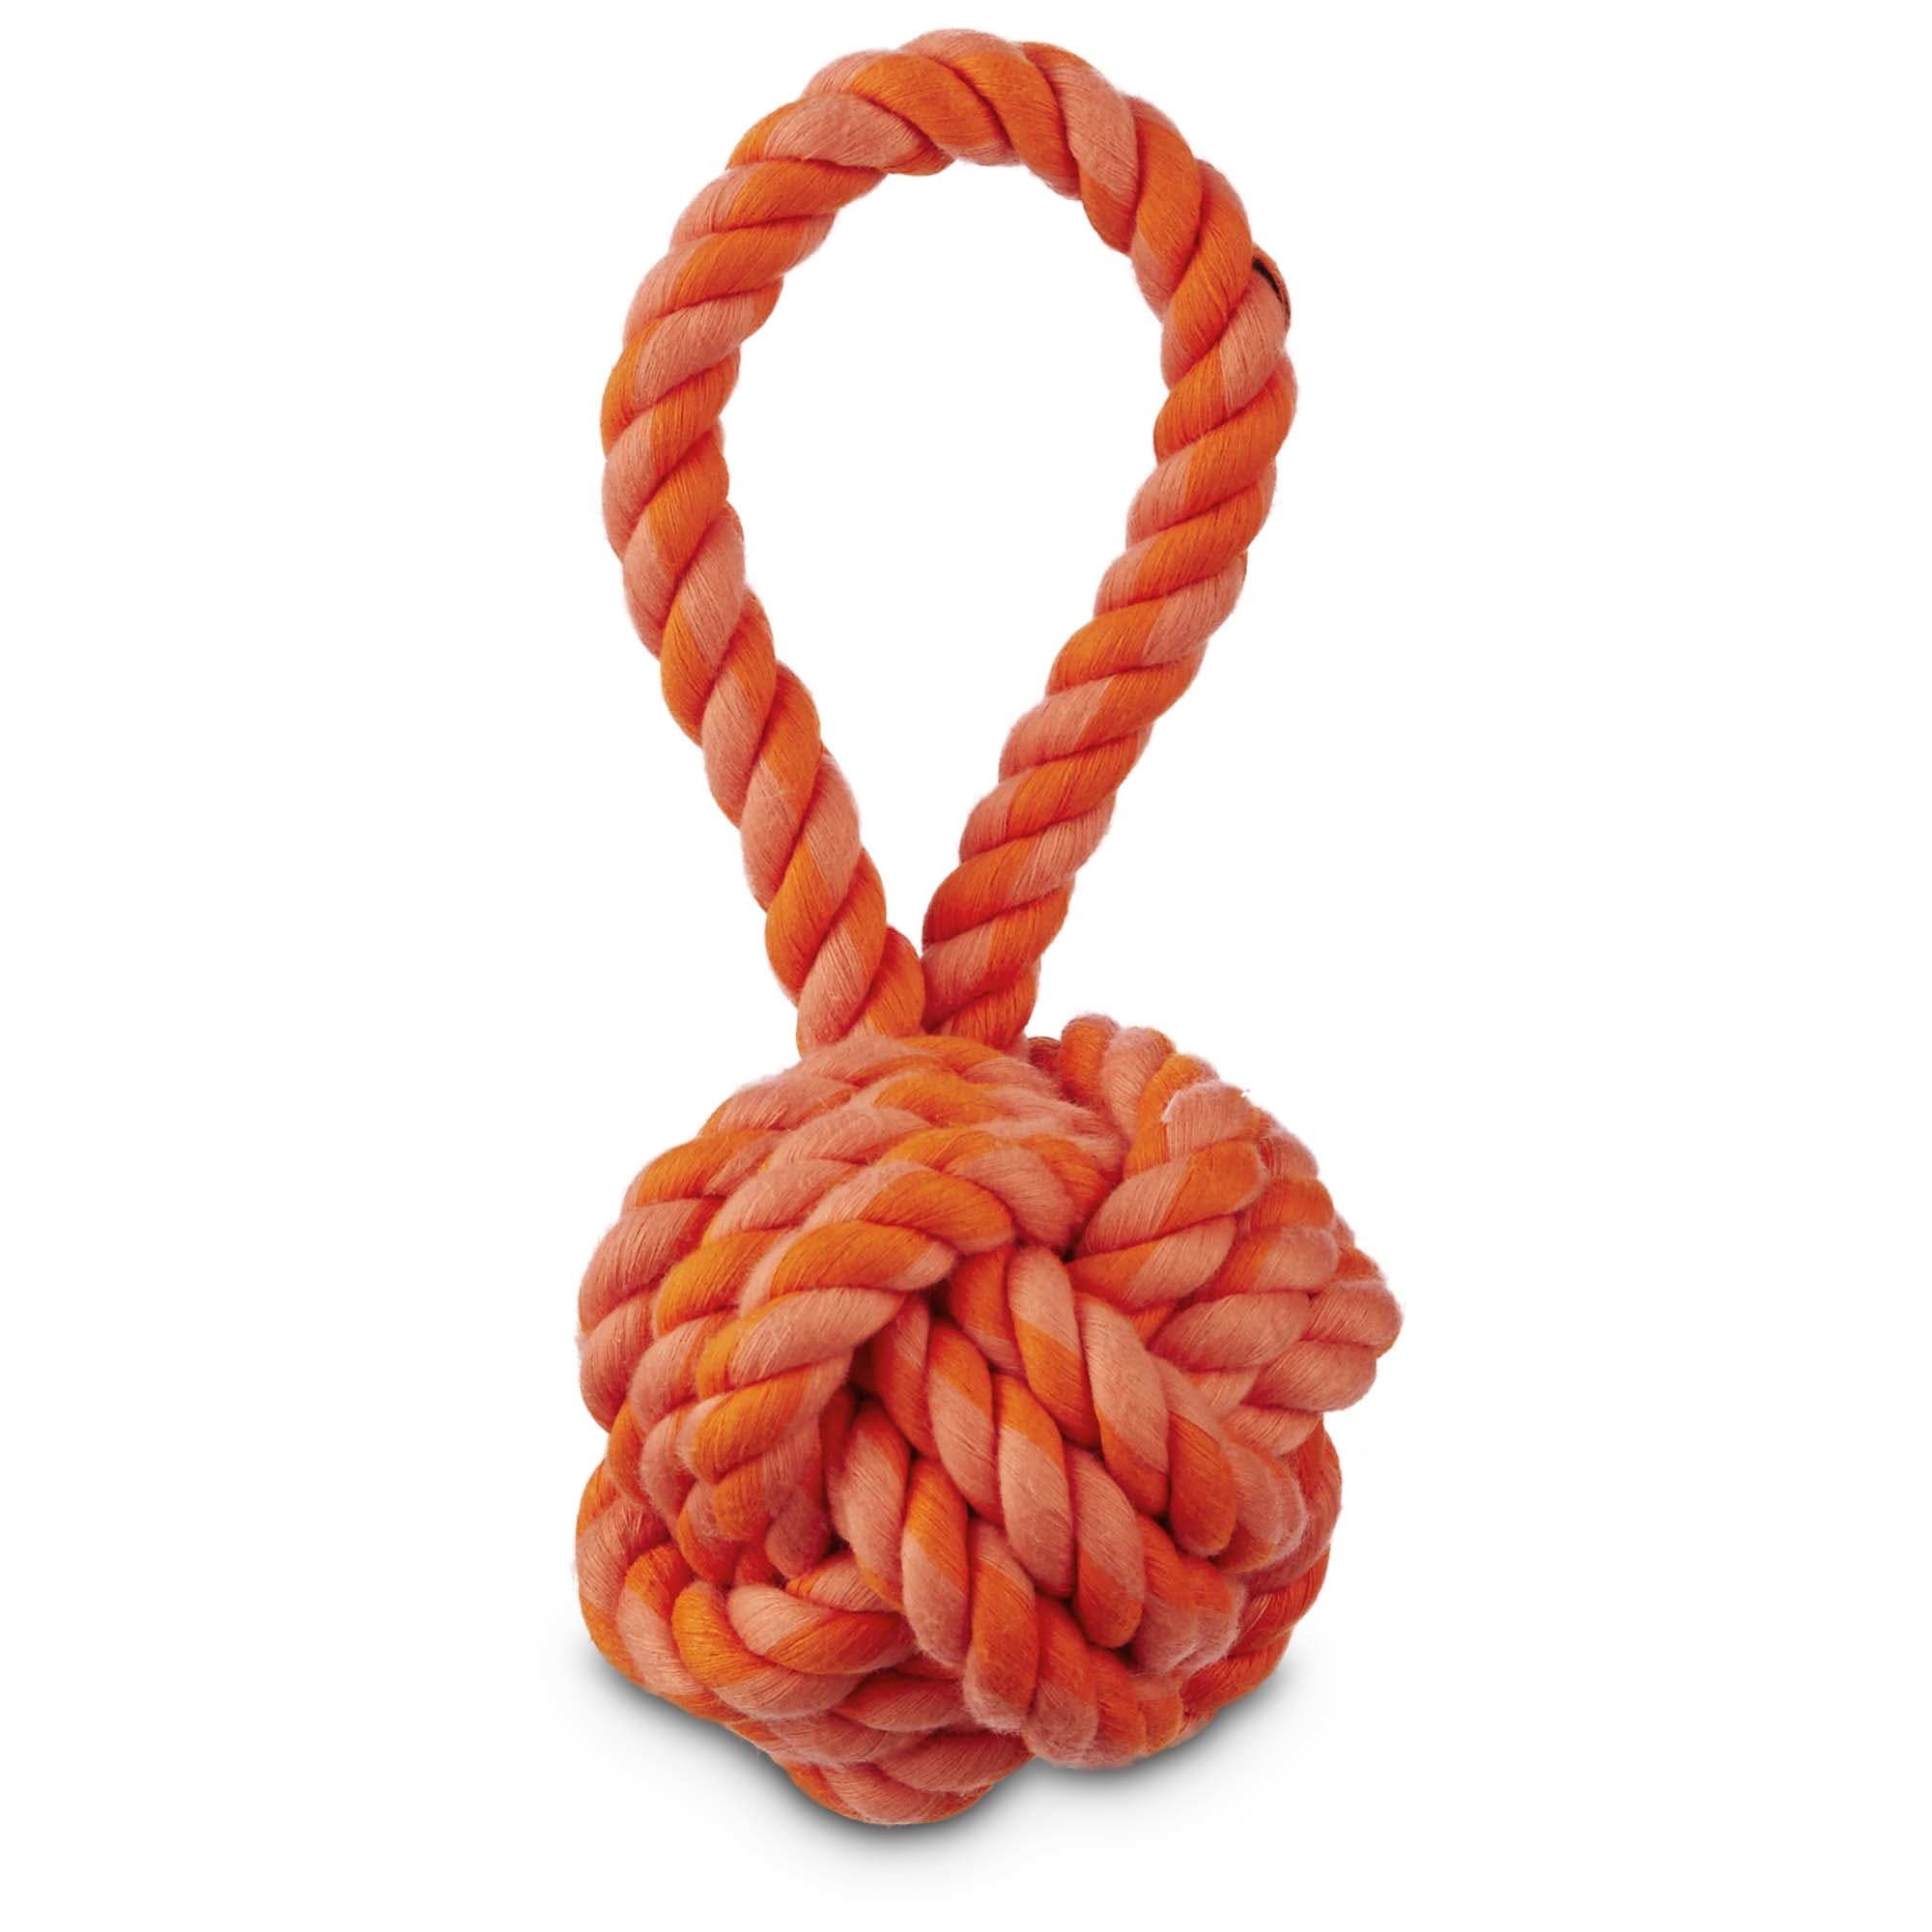 rope ball dog toy